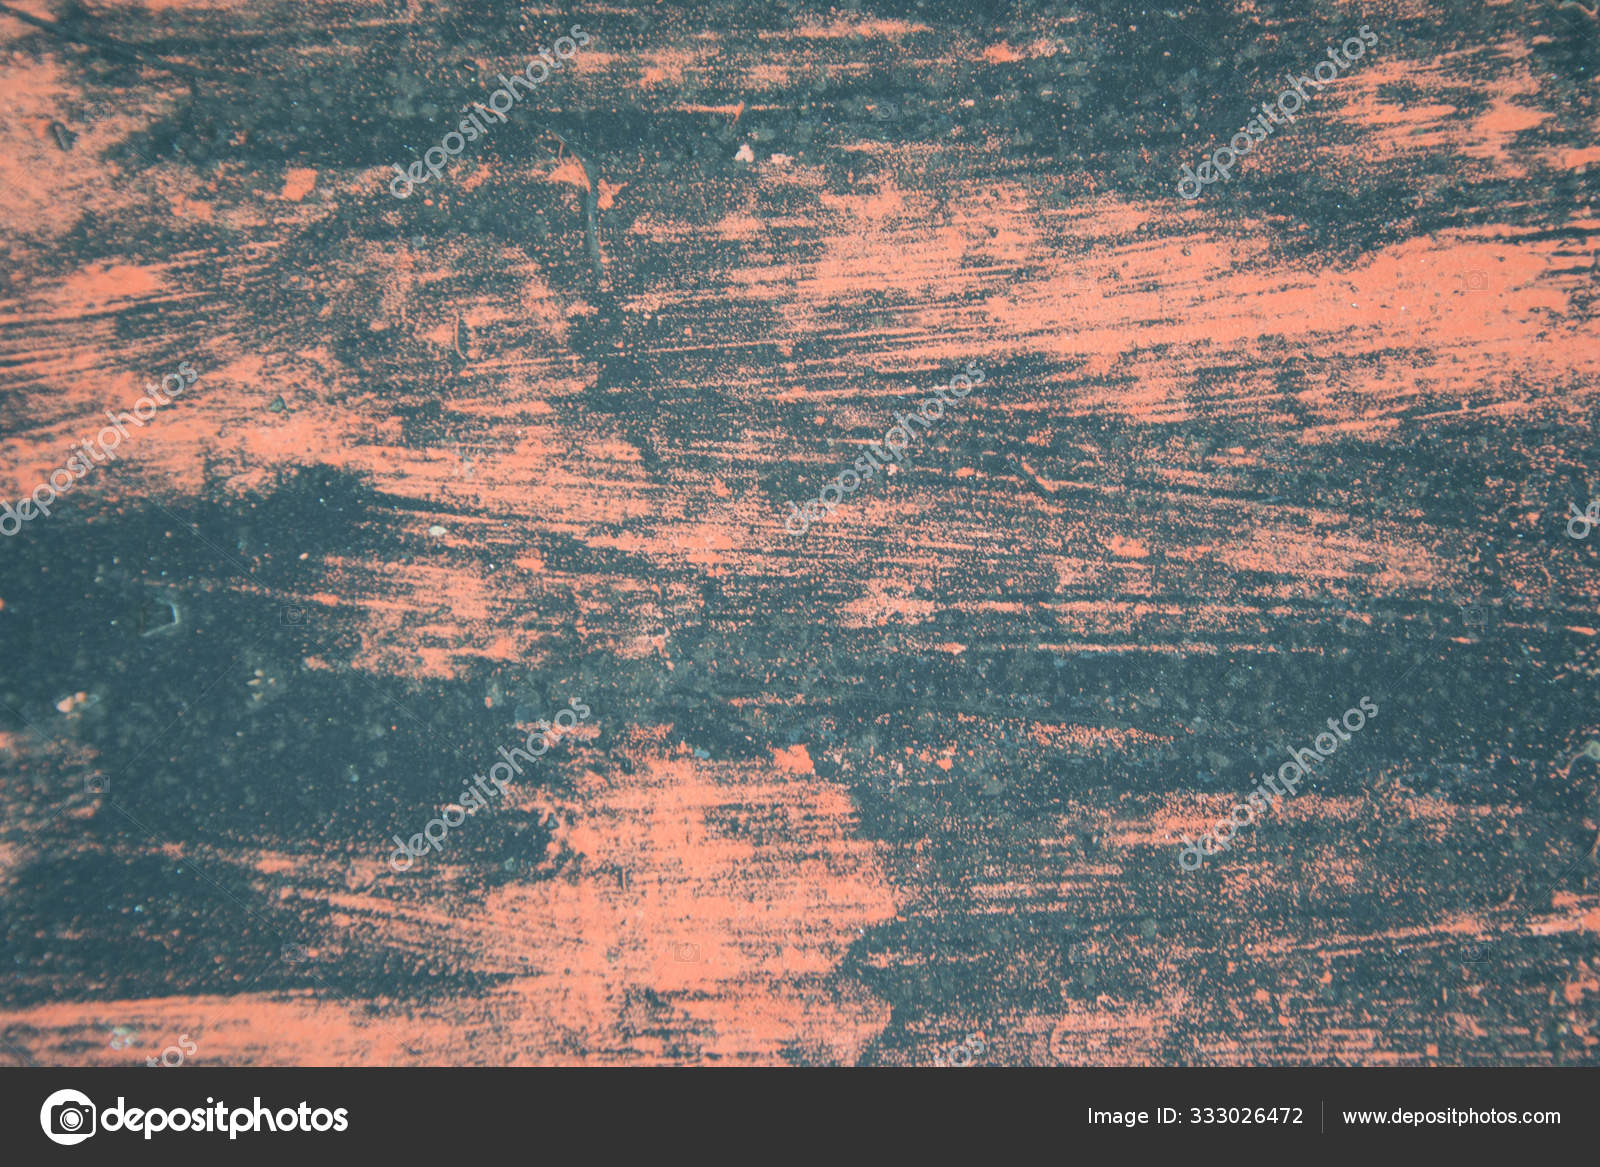 Download High Resolution Rusty Metal Texture Red Seamless Background Designer Painted Stock Photo Image By C Vboycheva Abv Bg 333026472